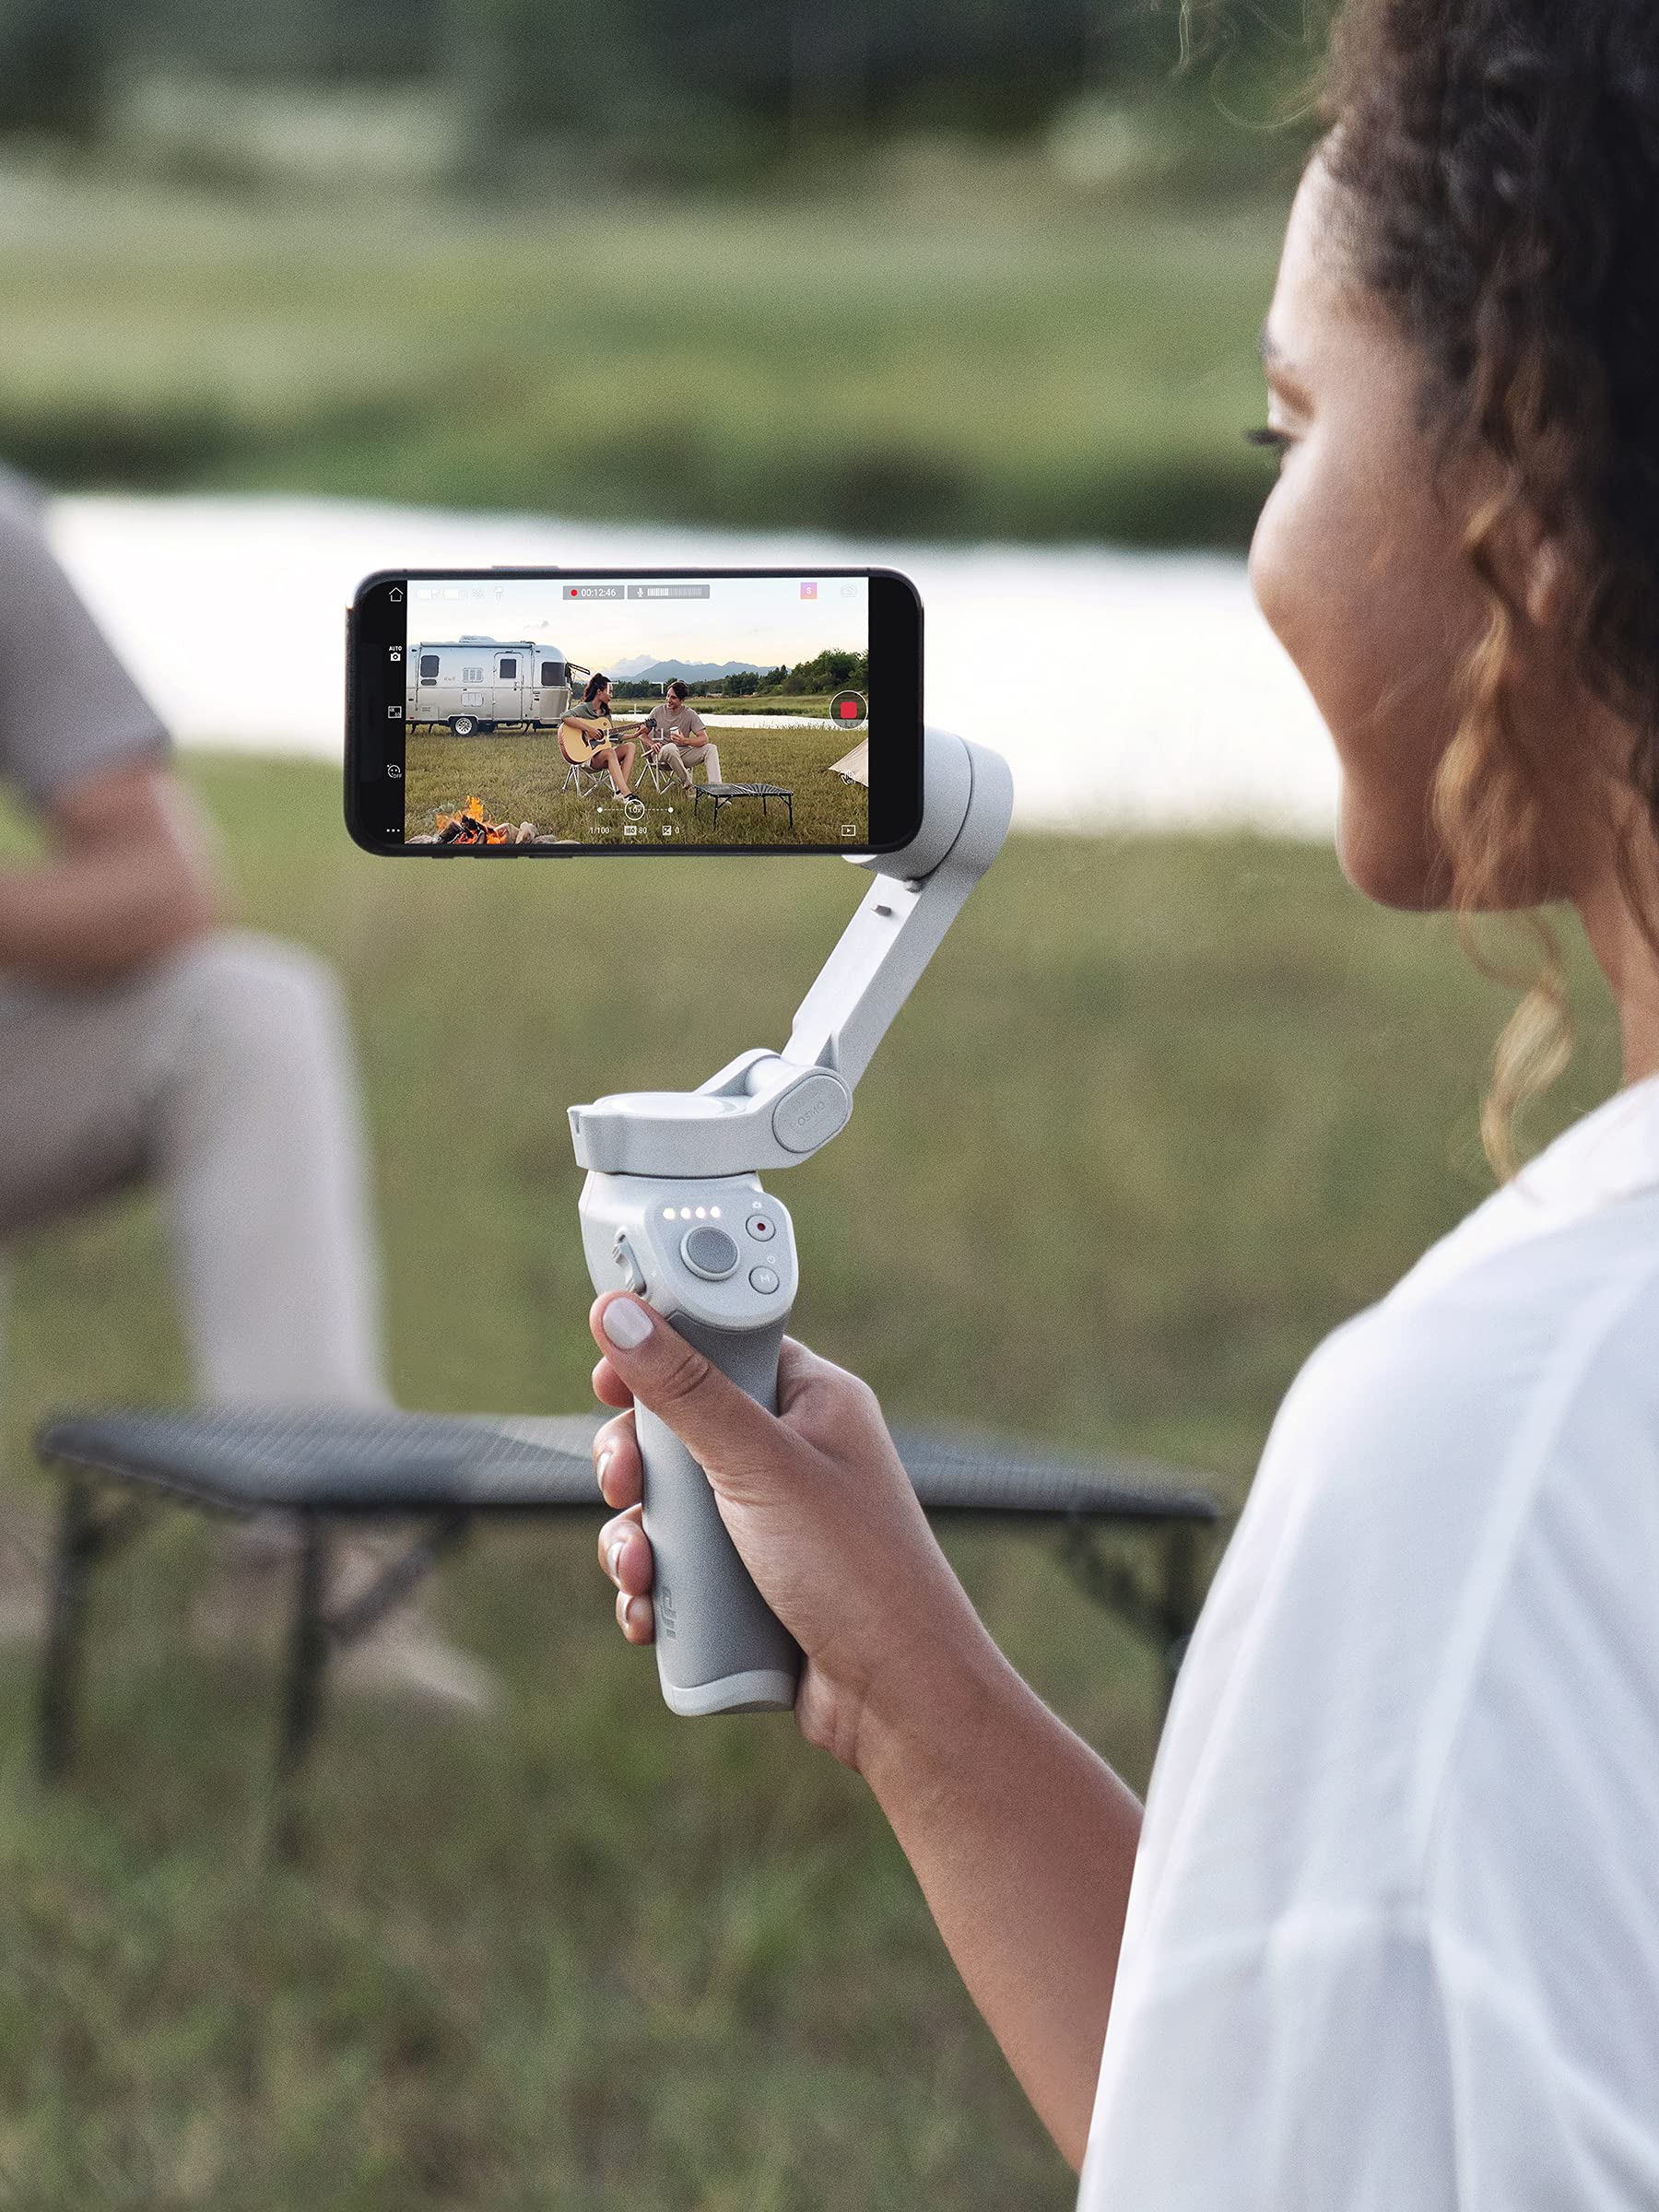 DJI OM 4 - Handheld 3-Axis Smartphone Gimbal Stabilizer with Grip, Tripod, Gimbal Stabilizer Ideal for Vlogging, YouTube, Live Video, Phone Stabilizer Compatible with iPhone and Android